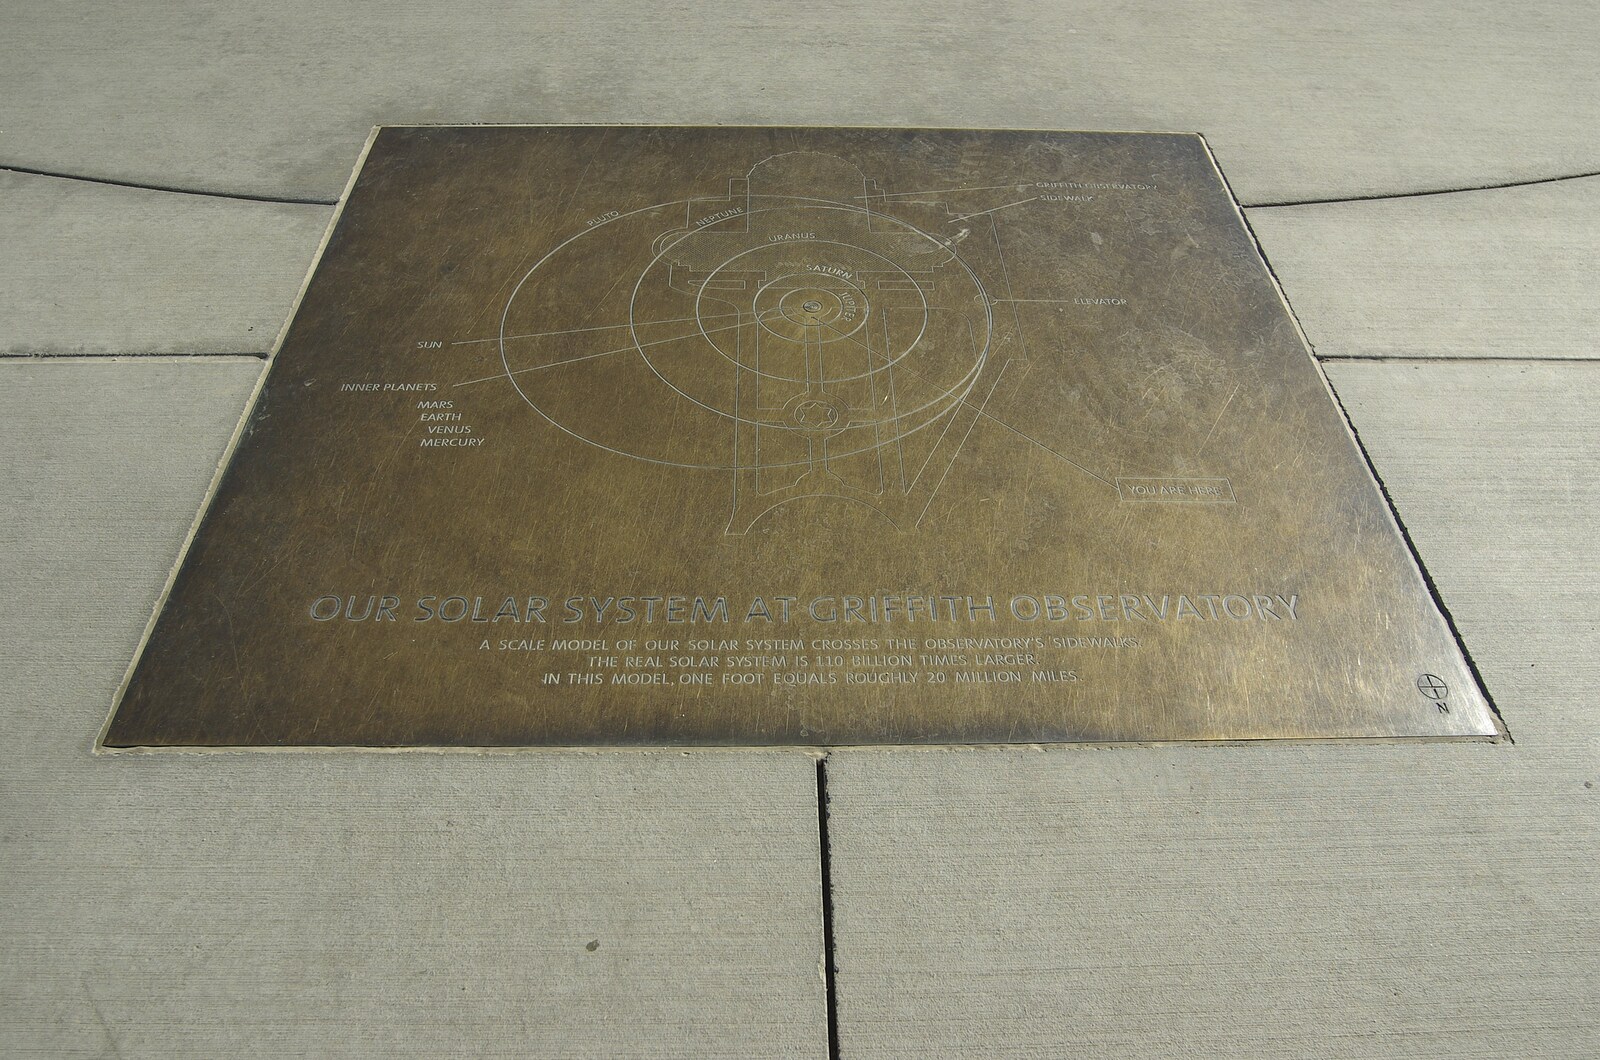 San Diego and Hollywood, California, US - 3rd March 2008: A brass engraving of the solar system